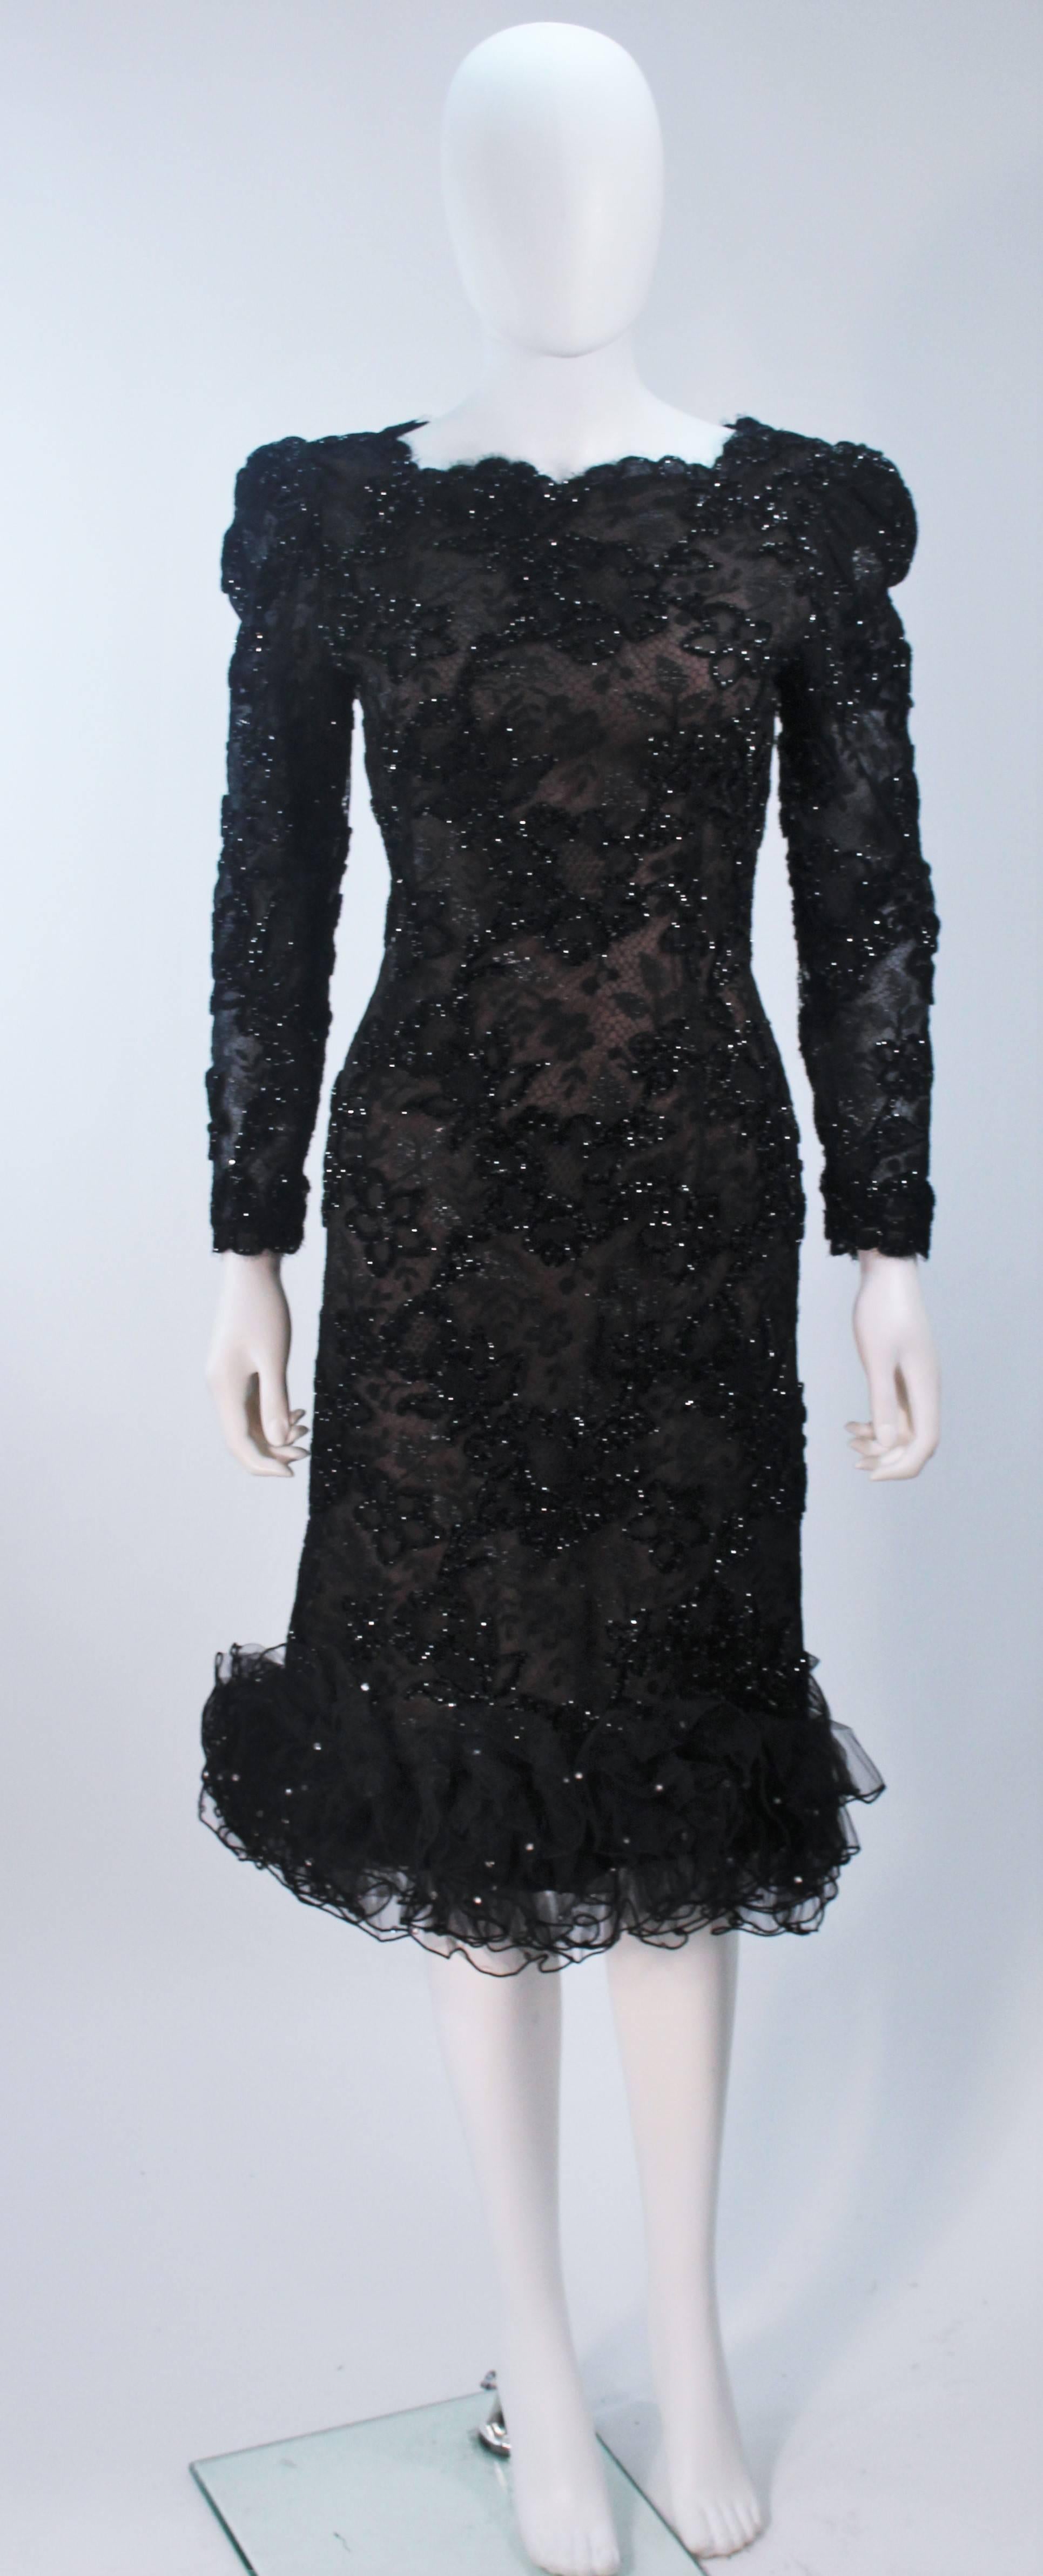  This Oscar De La Renta  cocktail dress is composed of a black lace combination with nude base. Features a ruffled hem with rhinestones splashed throughout the hem. There is a center back closure. In excellent vintage condition.

  **Please